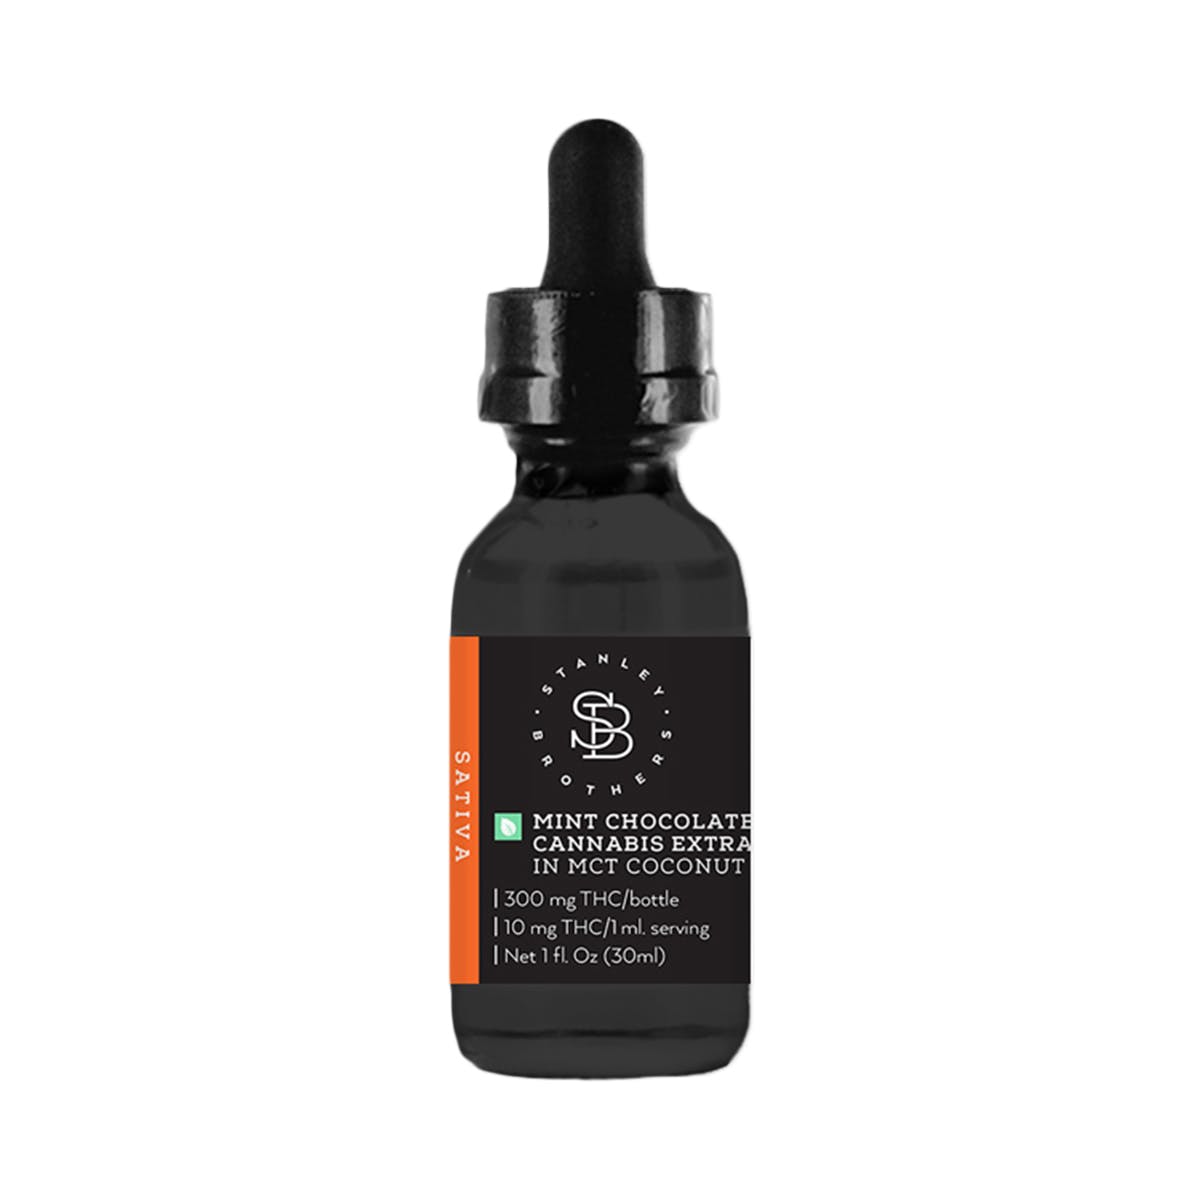 marijuana-dispensaries-natural-alternatives-for-health-medical-in-fort-collins-sb-tincture-mint-chocolate-sativa-300mg-thc-med